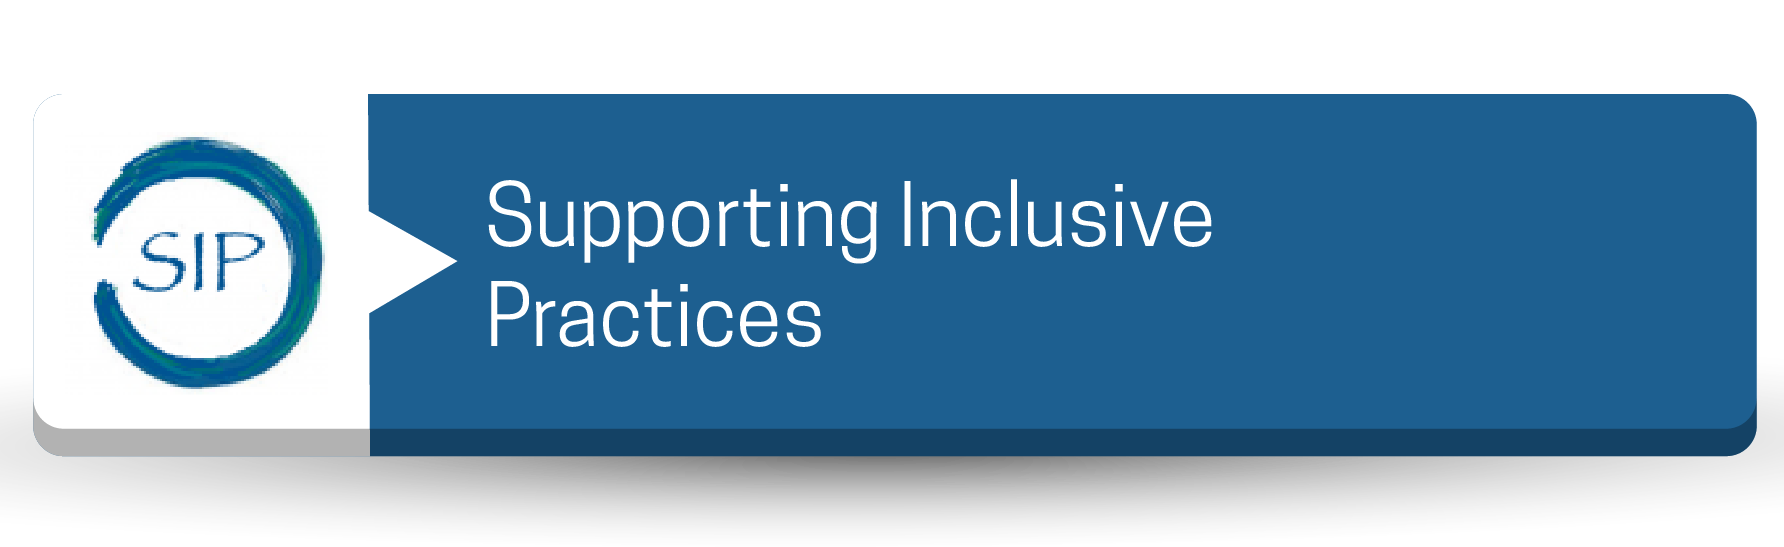 Supporting Inclusive Practices Button